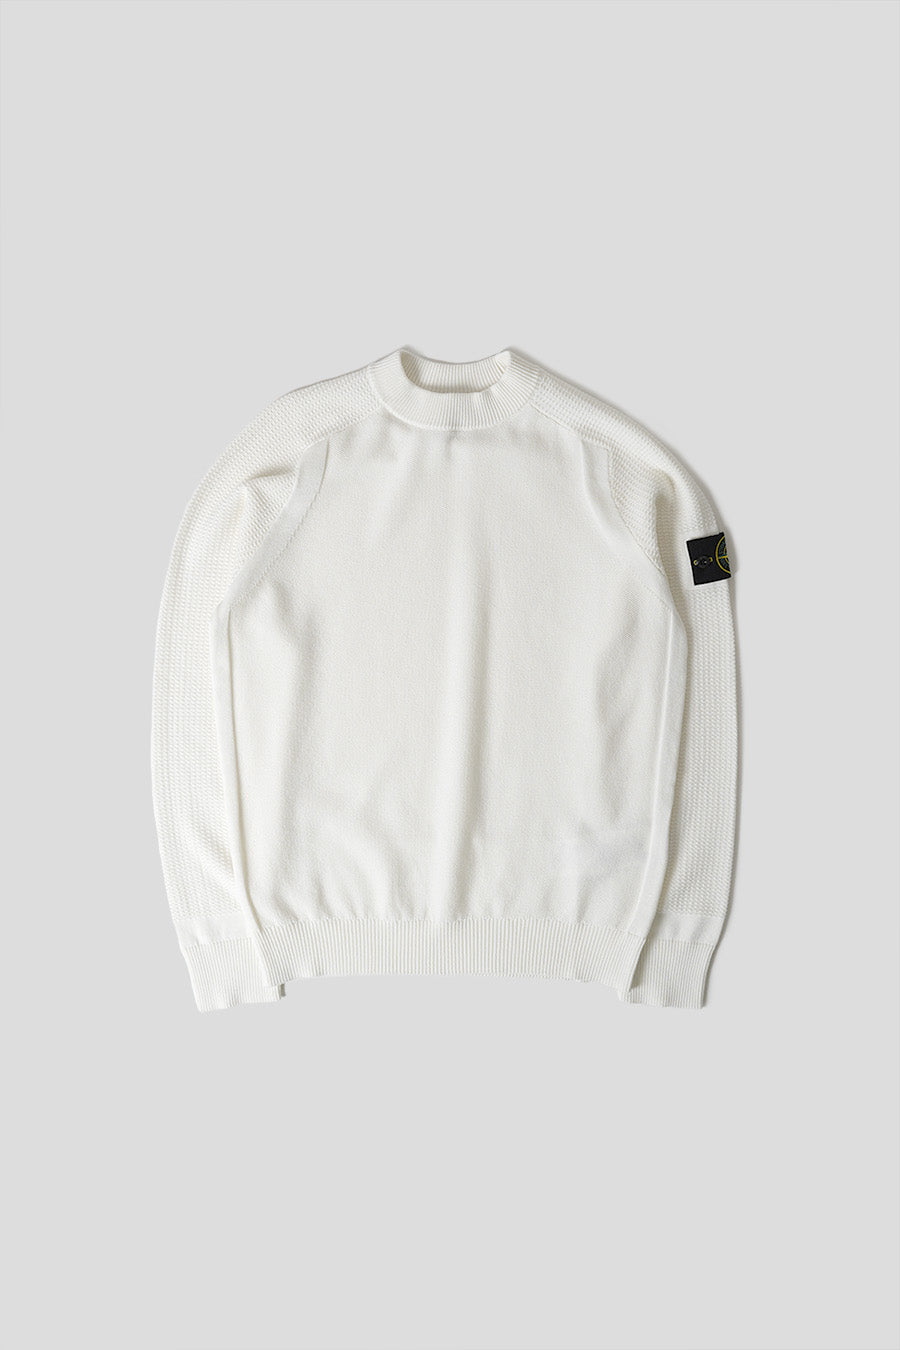 Stone Island - WHITE KNITTED JUMPER - LE LABO STORE